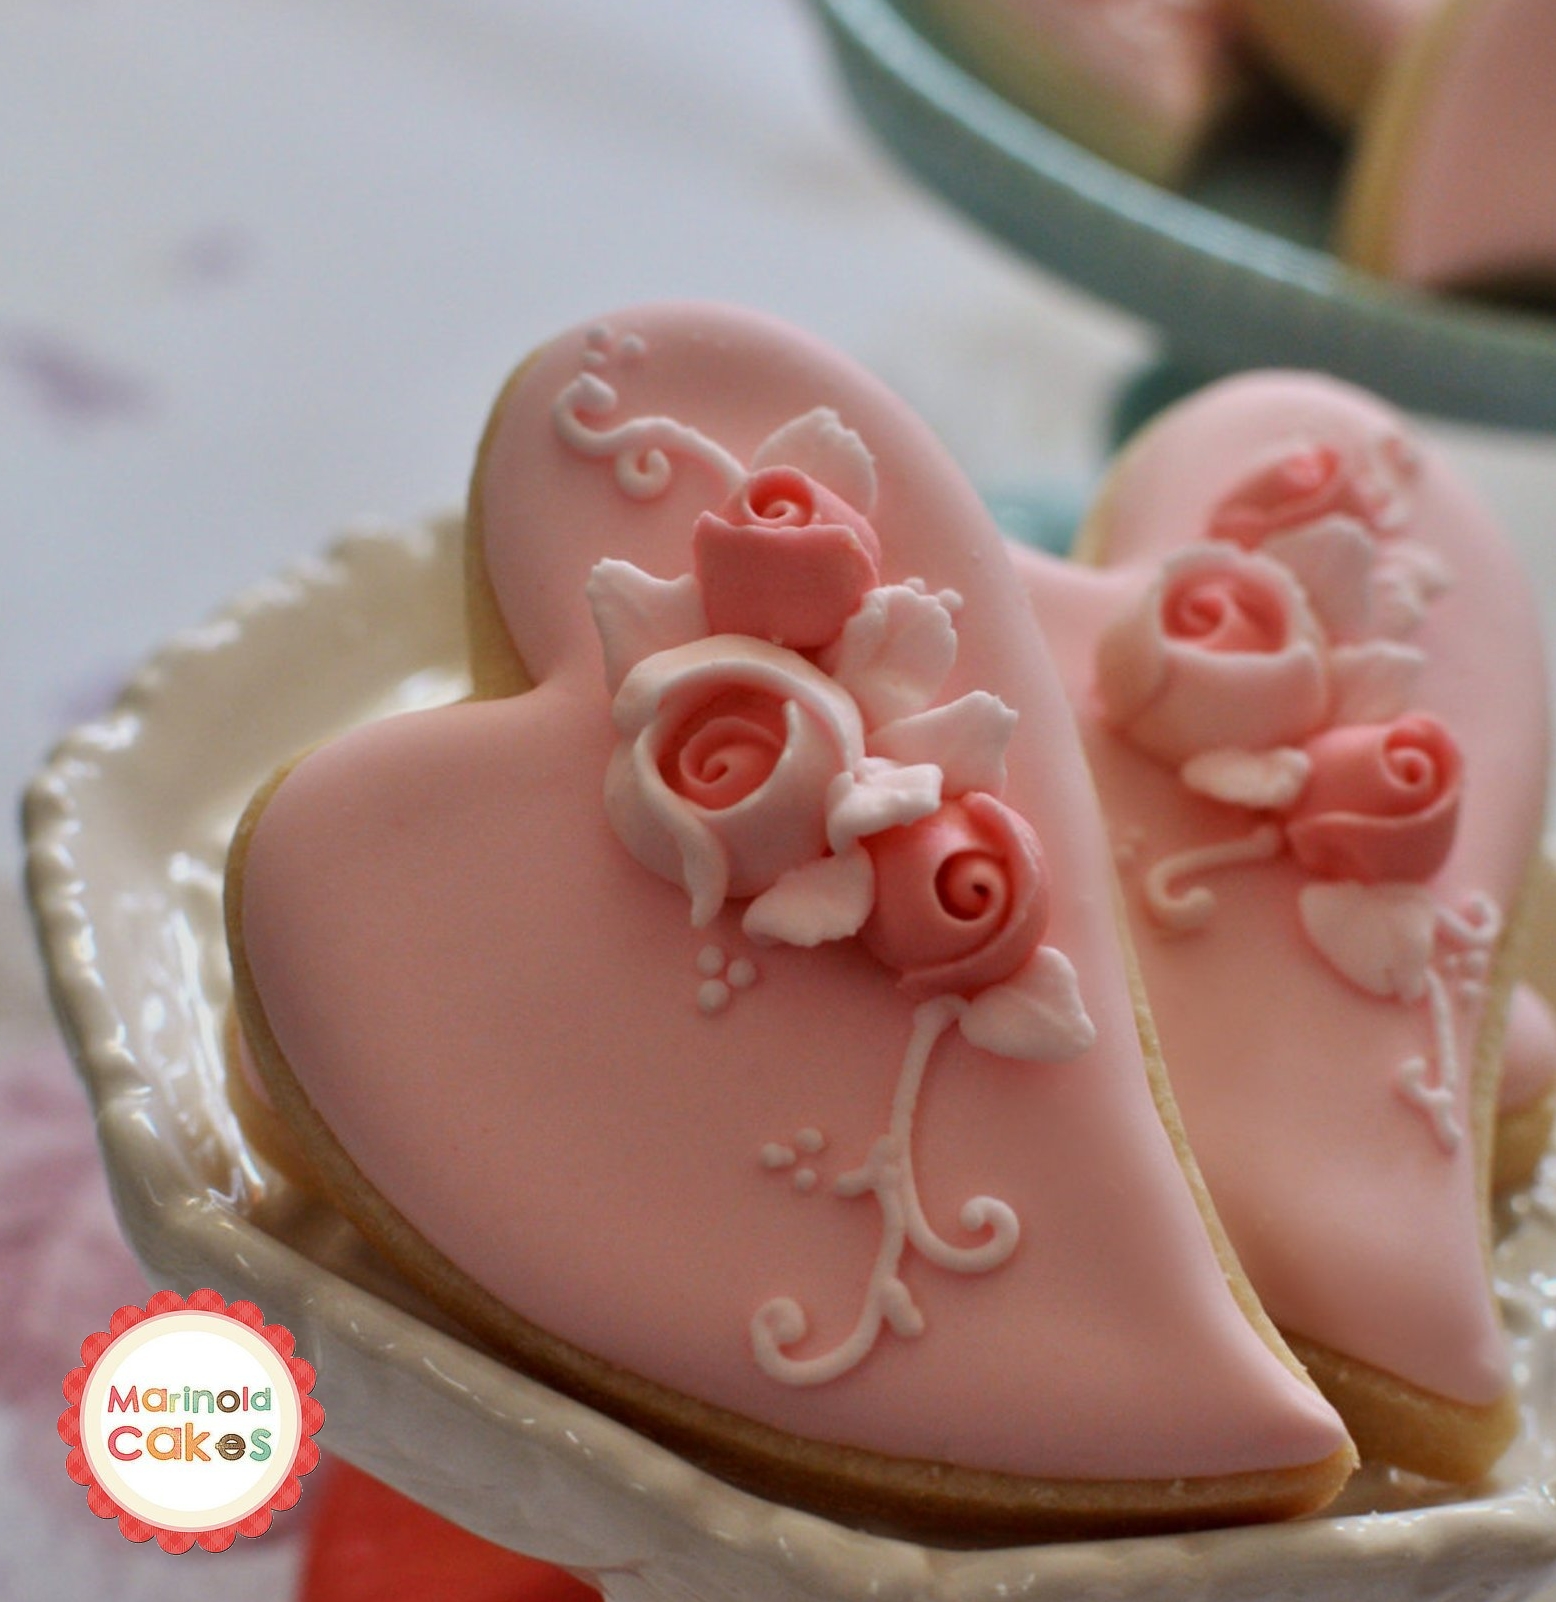 Heart Shape Fondant, Pastry and Cookie Cutters